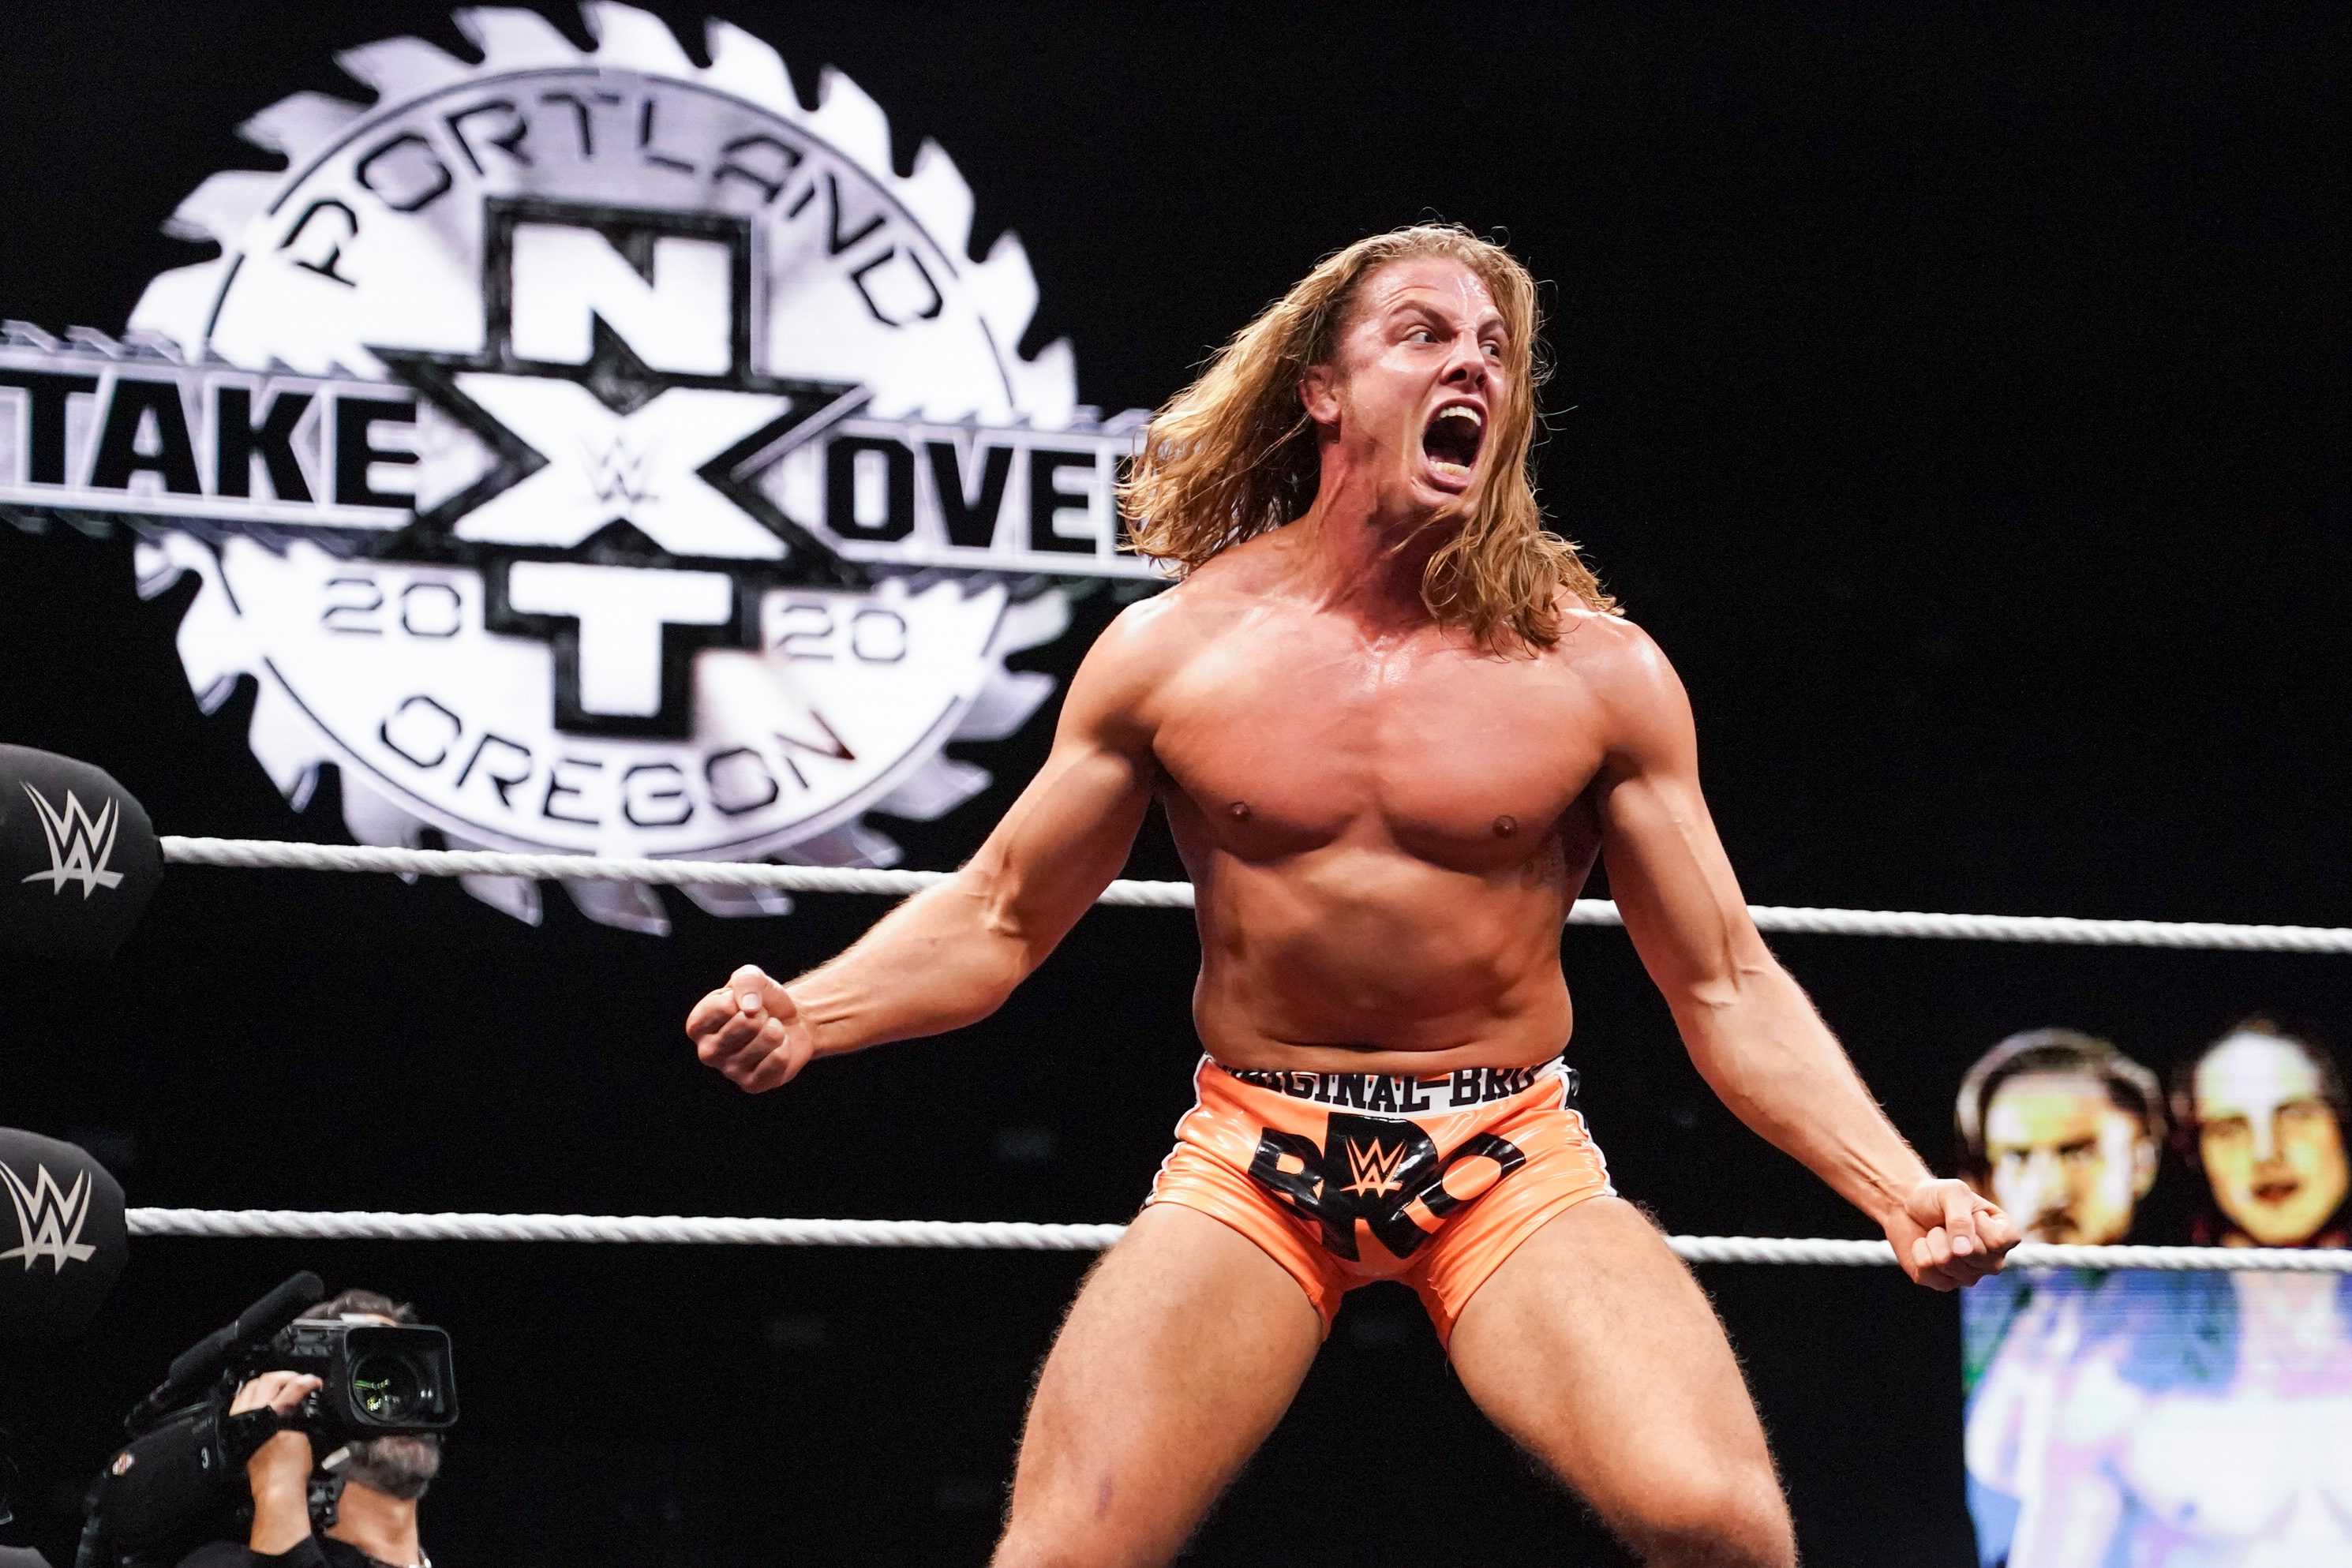 Raw Tag Team champion Riddle relishing ‘every opportunity’ in WWE